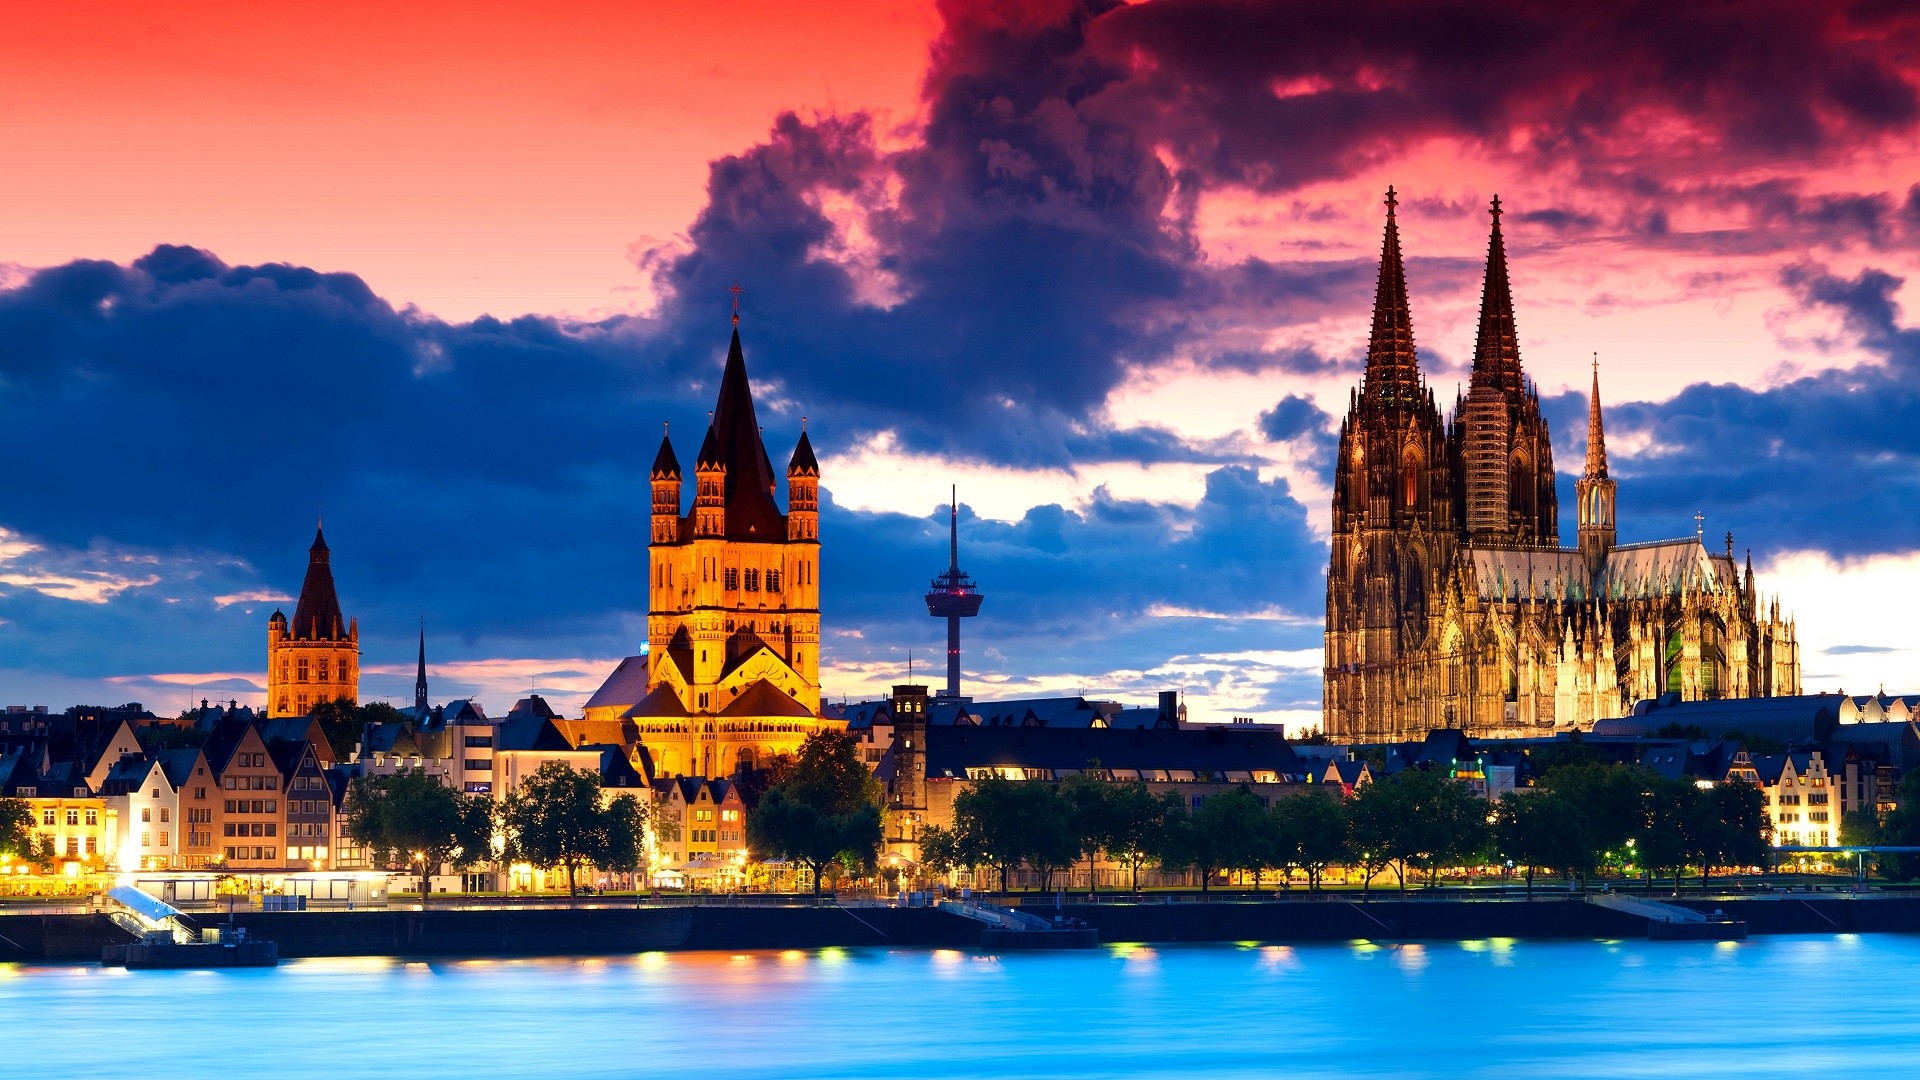 General 1920x1080 Cologne Germany architecture gothic architecture sunset city cityscape landmark